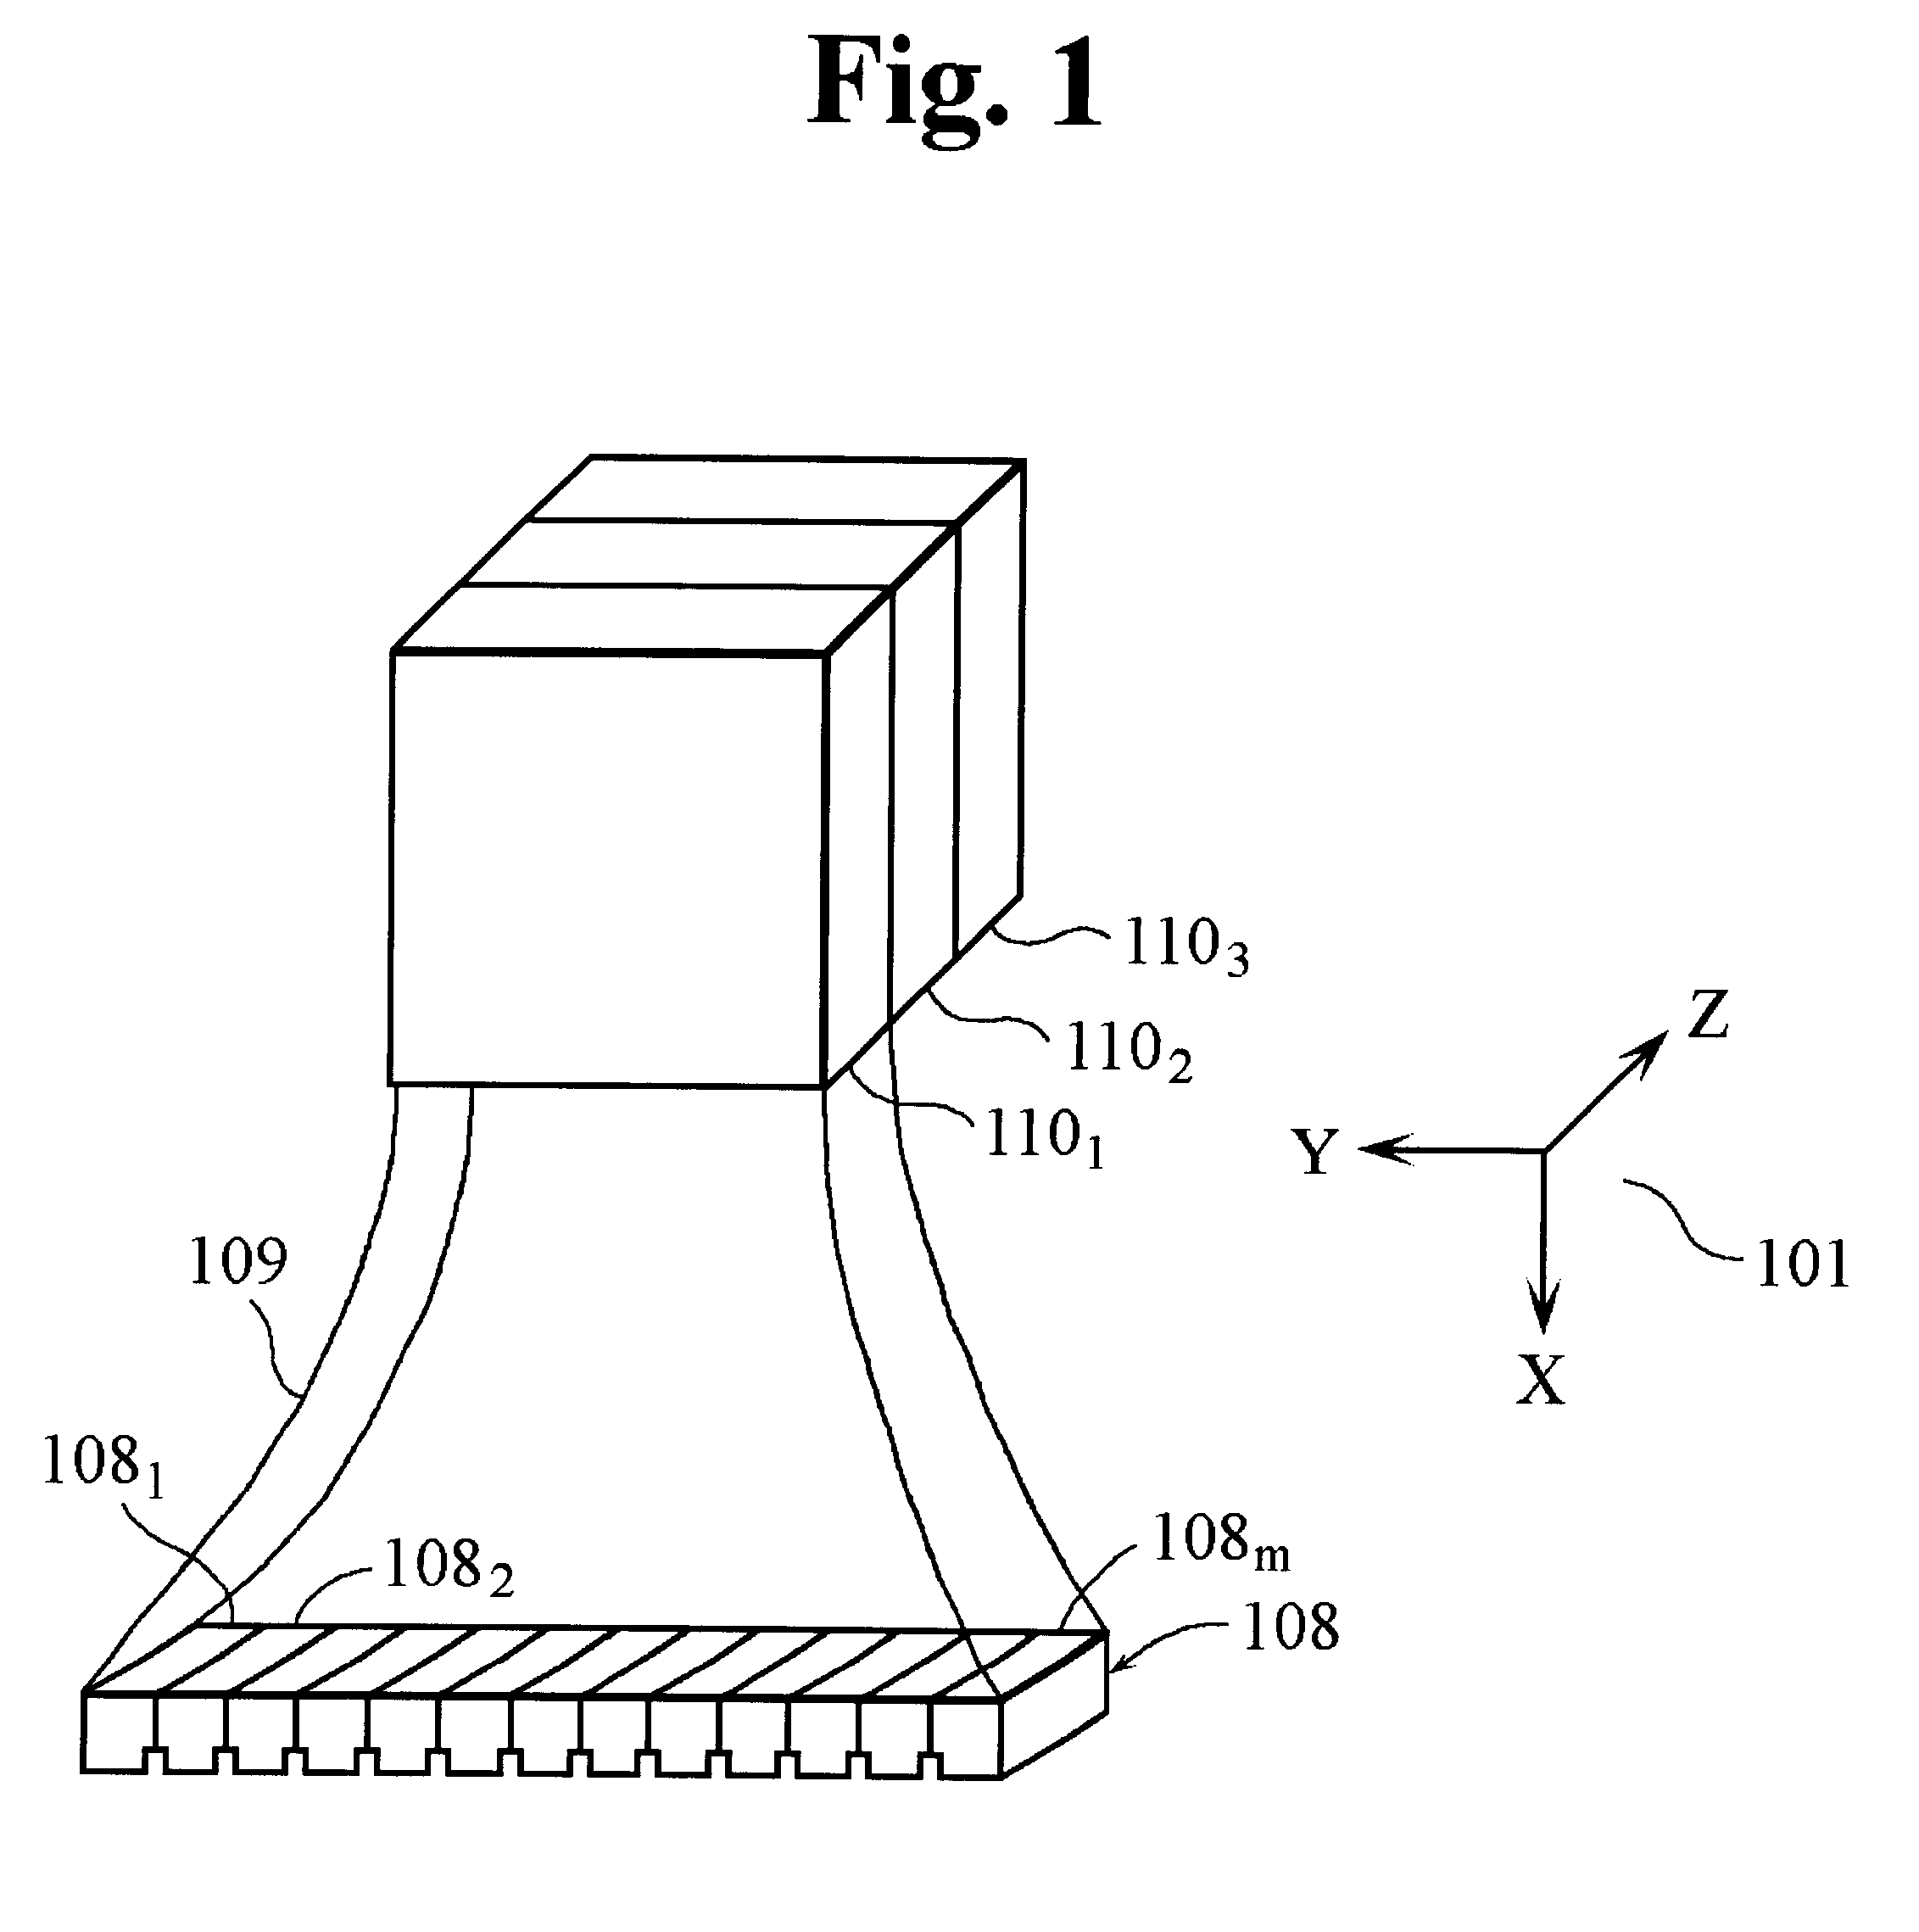 System and method for three-dimensional ultrasound imaging using a steerable probe